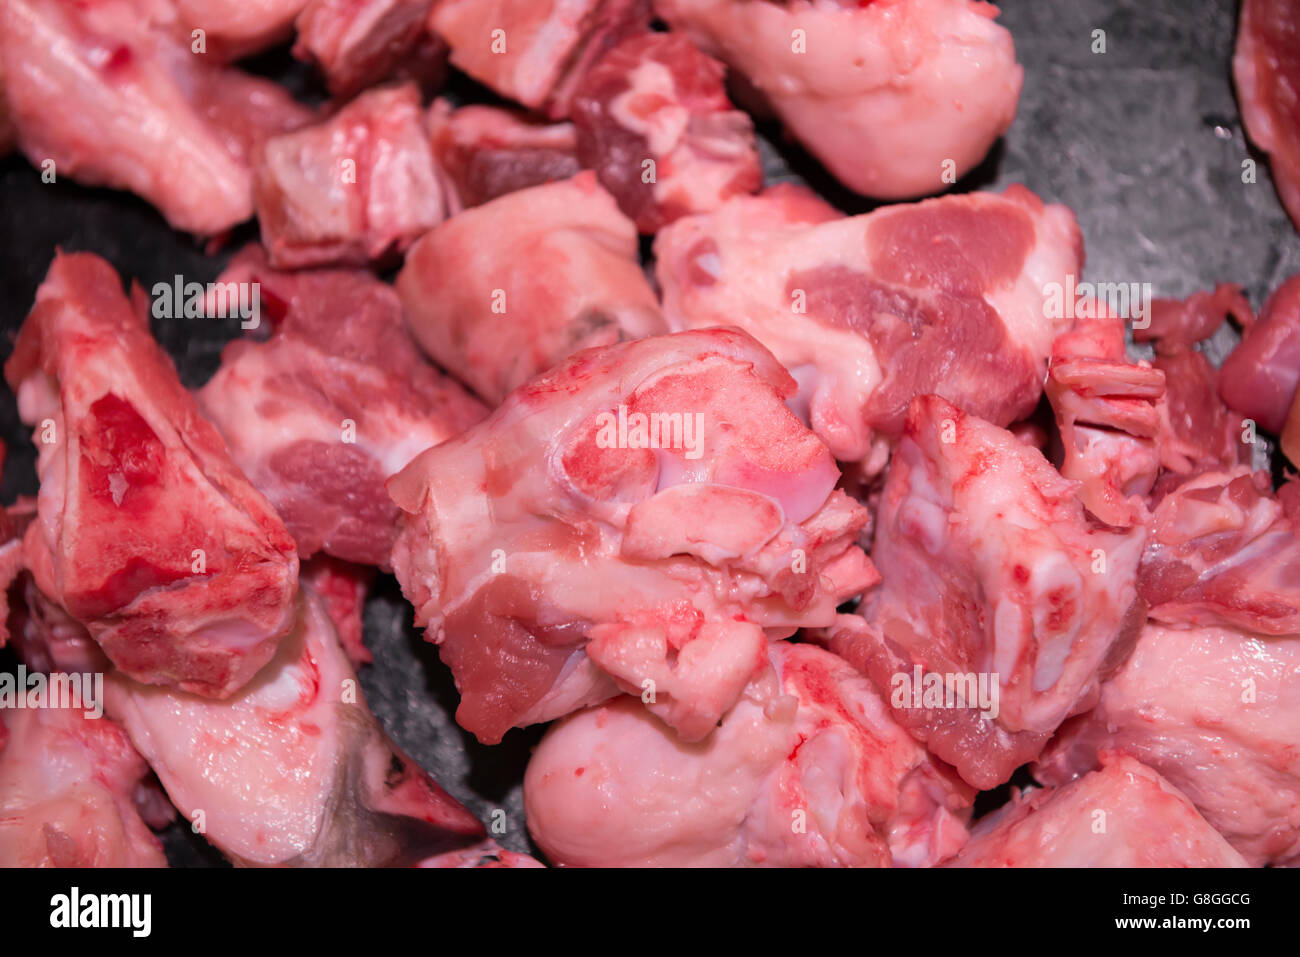 raw pork ribs on sale in a supermarket Stock Photo